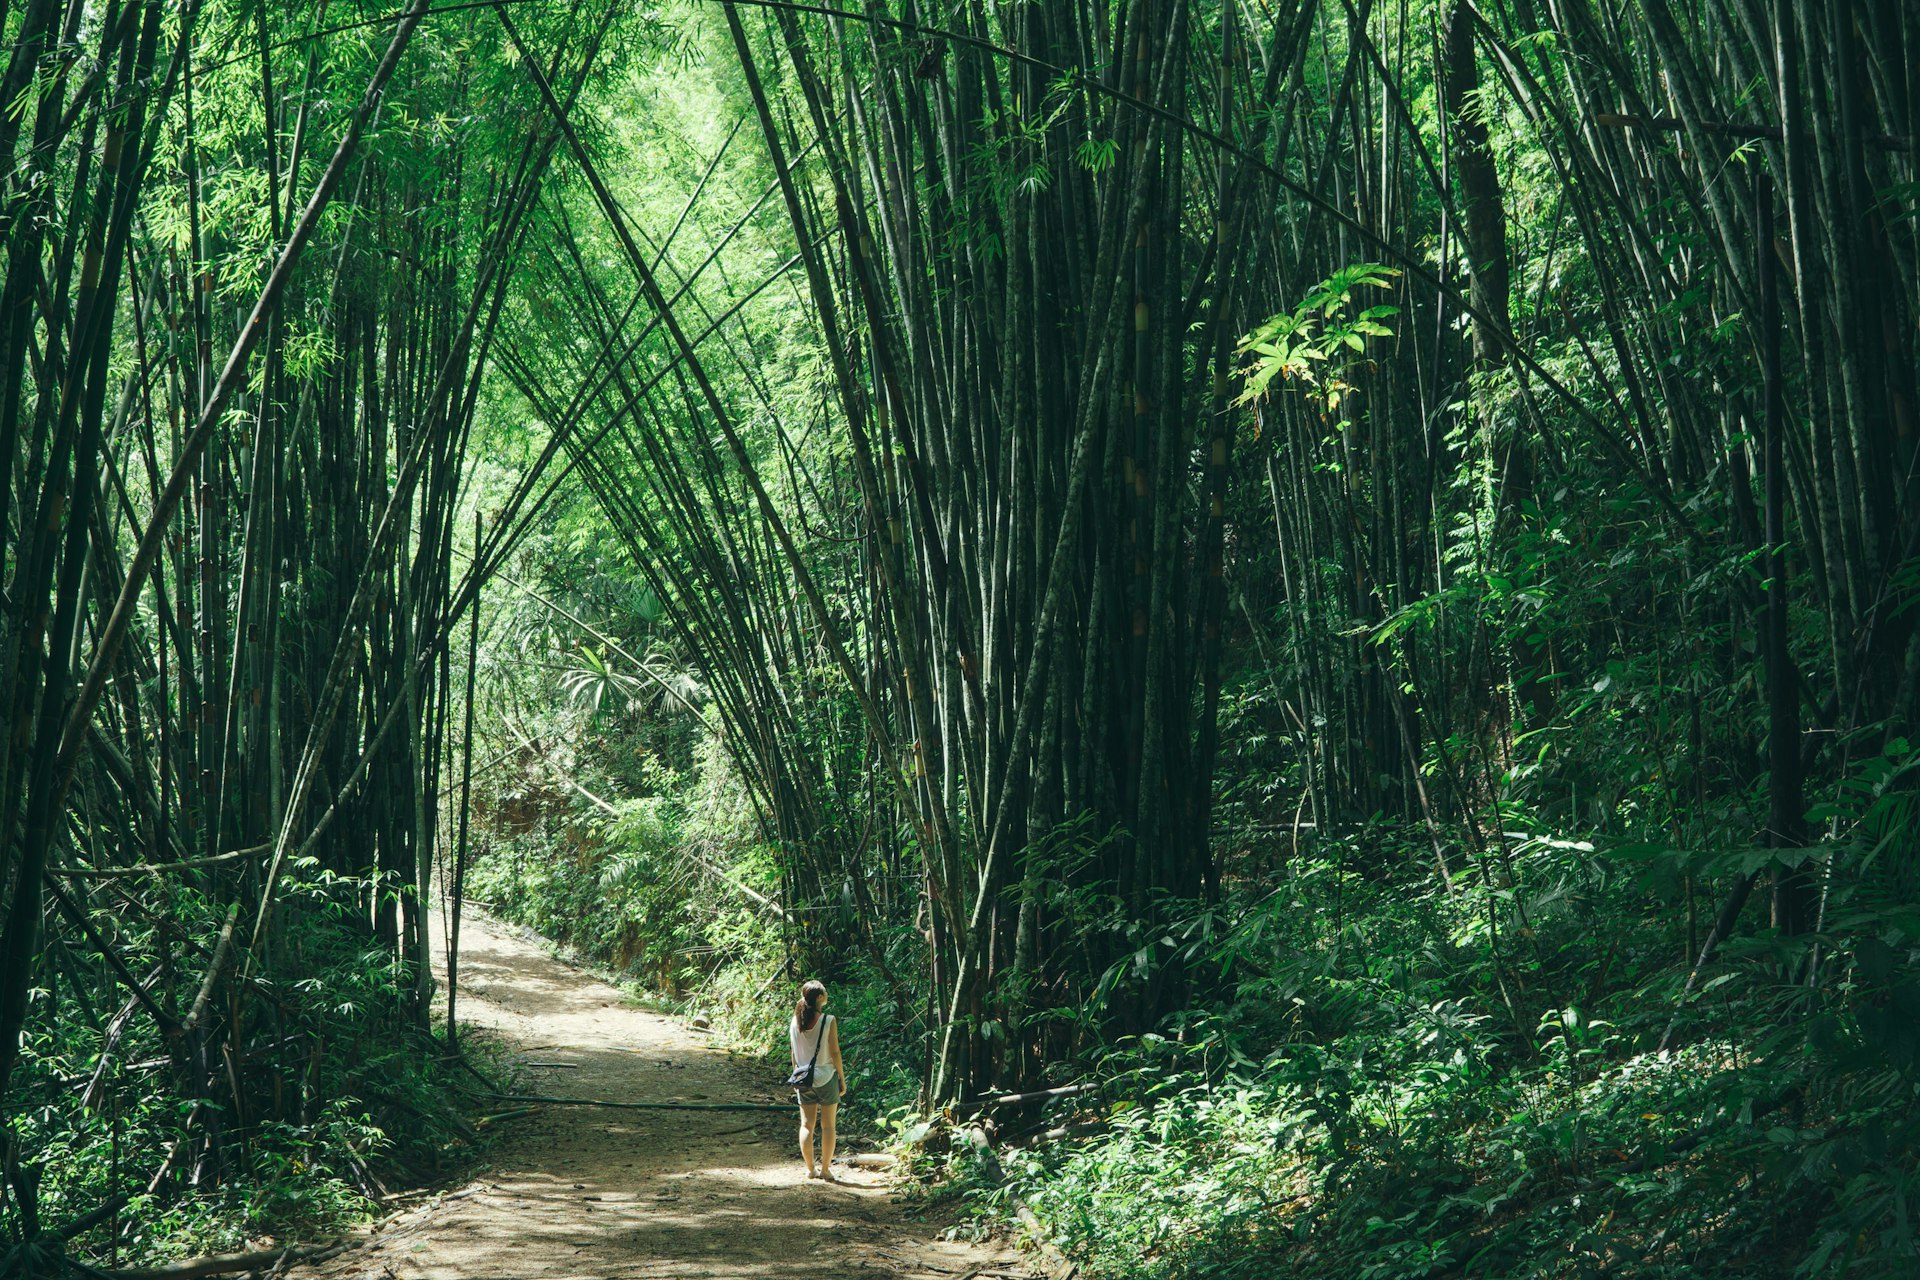 Woman exploring the Bamboo forest in Khao Sok National Park, Thailand